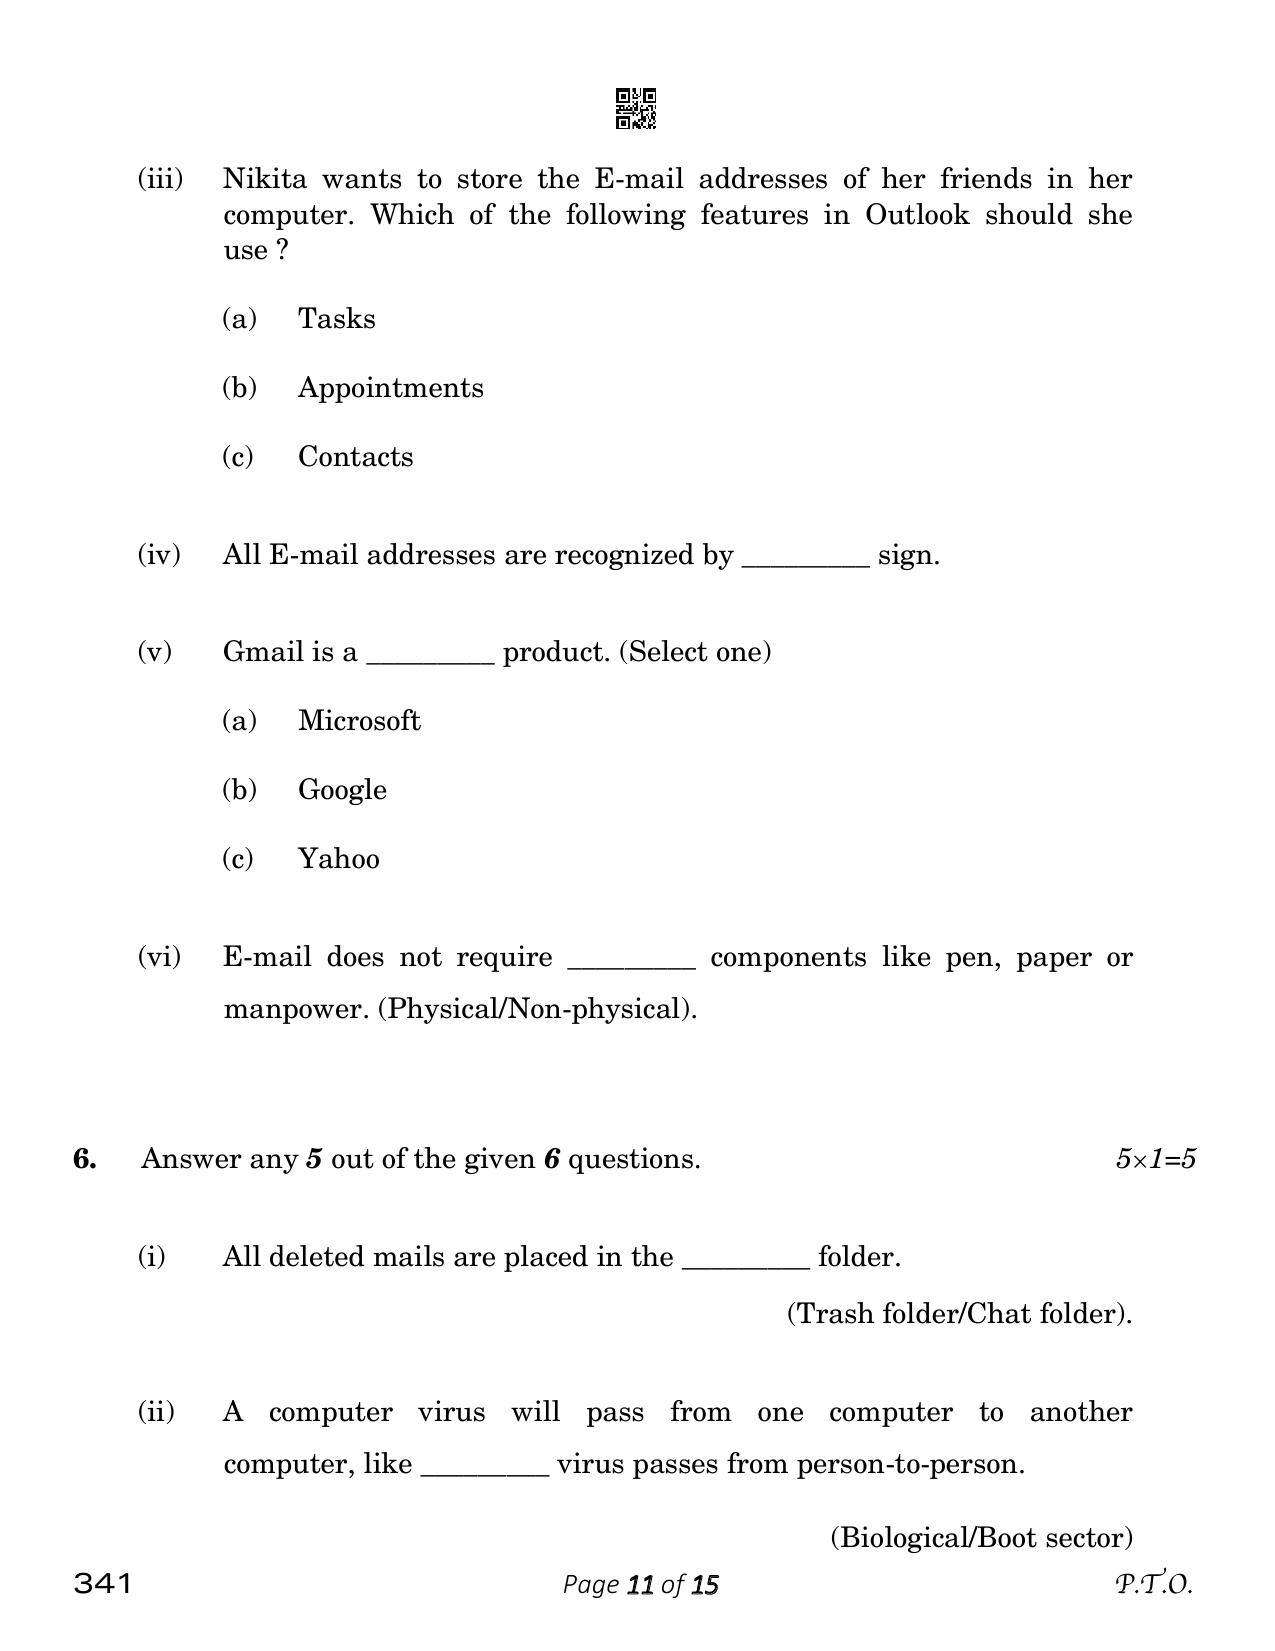 CBSE Class 12 Typography & Computer Applications (Compartment) 2023 Question Paper - Page 11